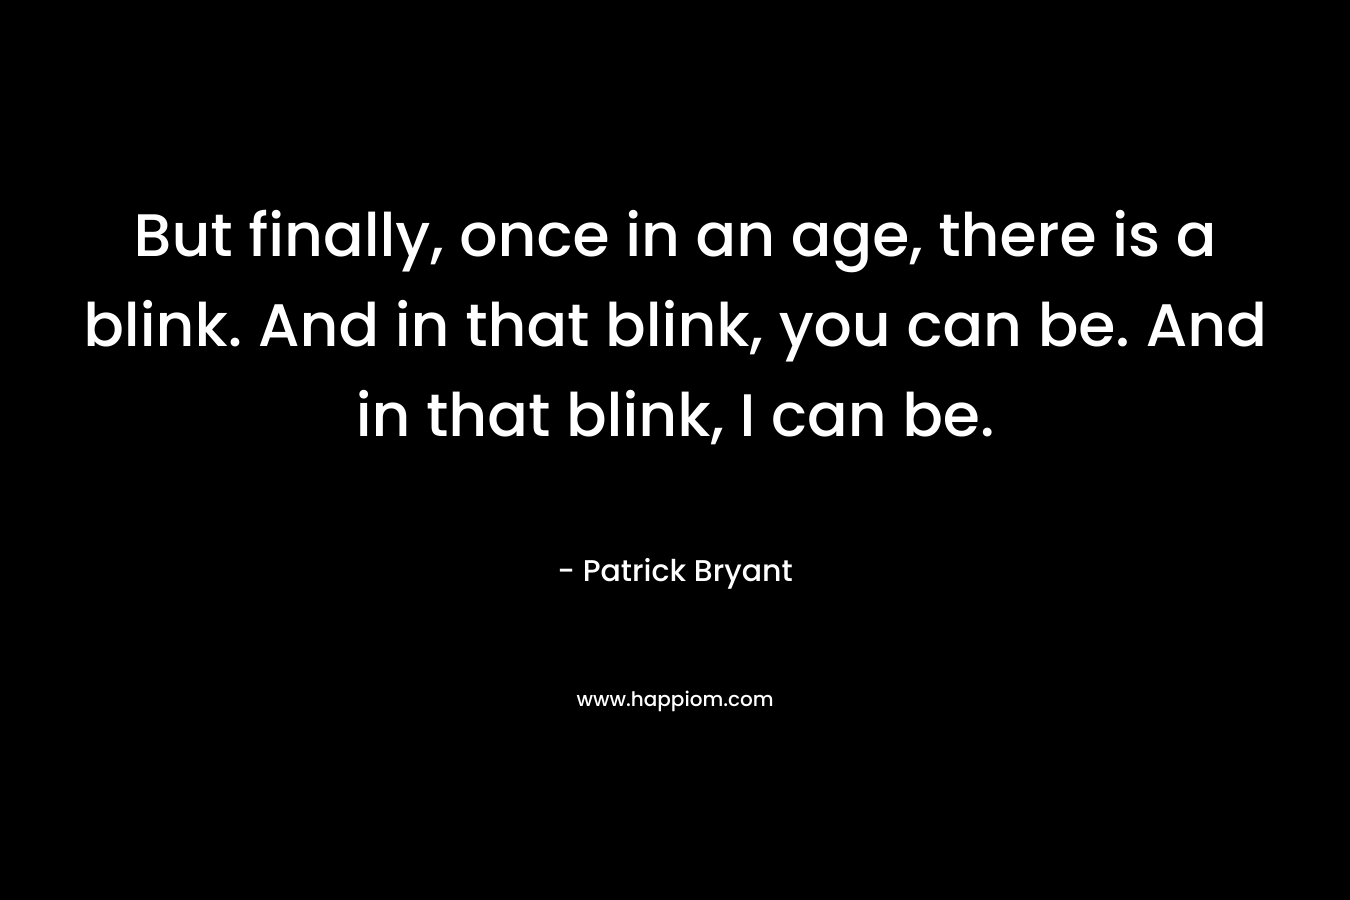 But finally, once in an age, there is a blink. And in that blink, you can be. And in that blink, I can be. – Patrick Bryant